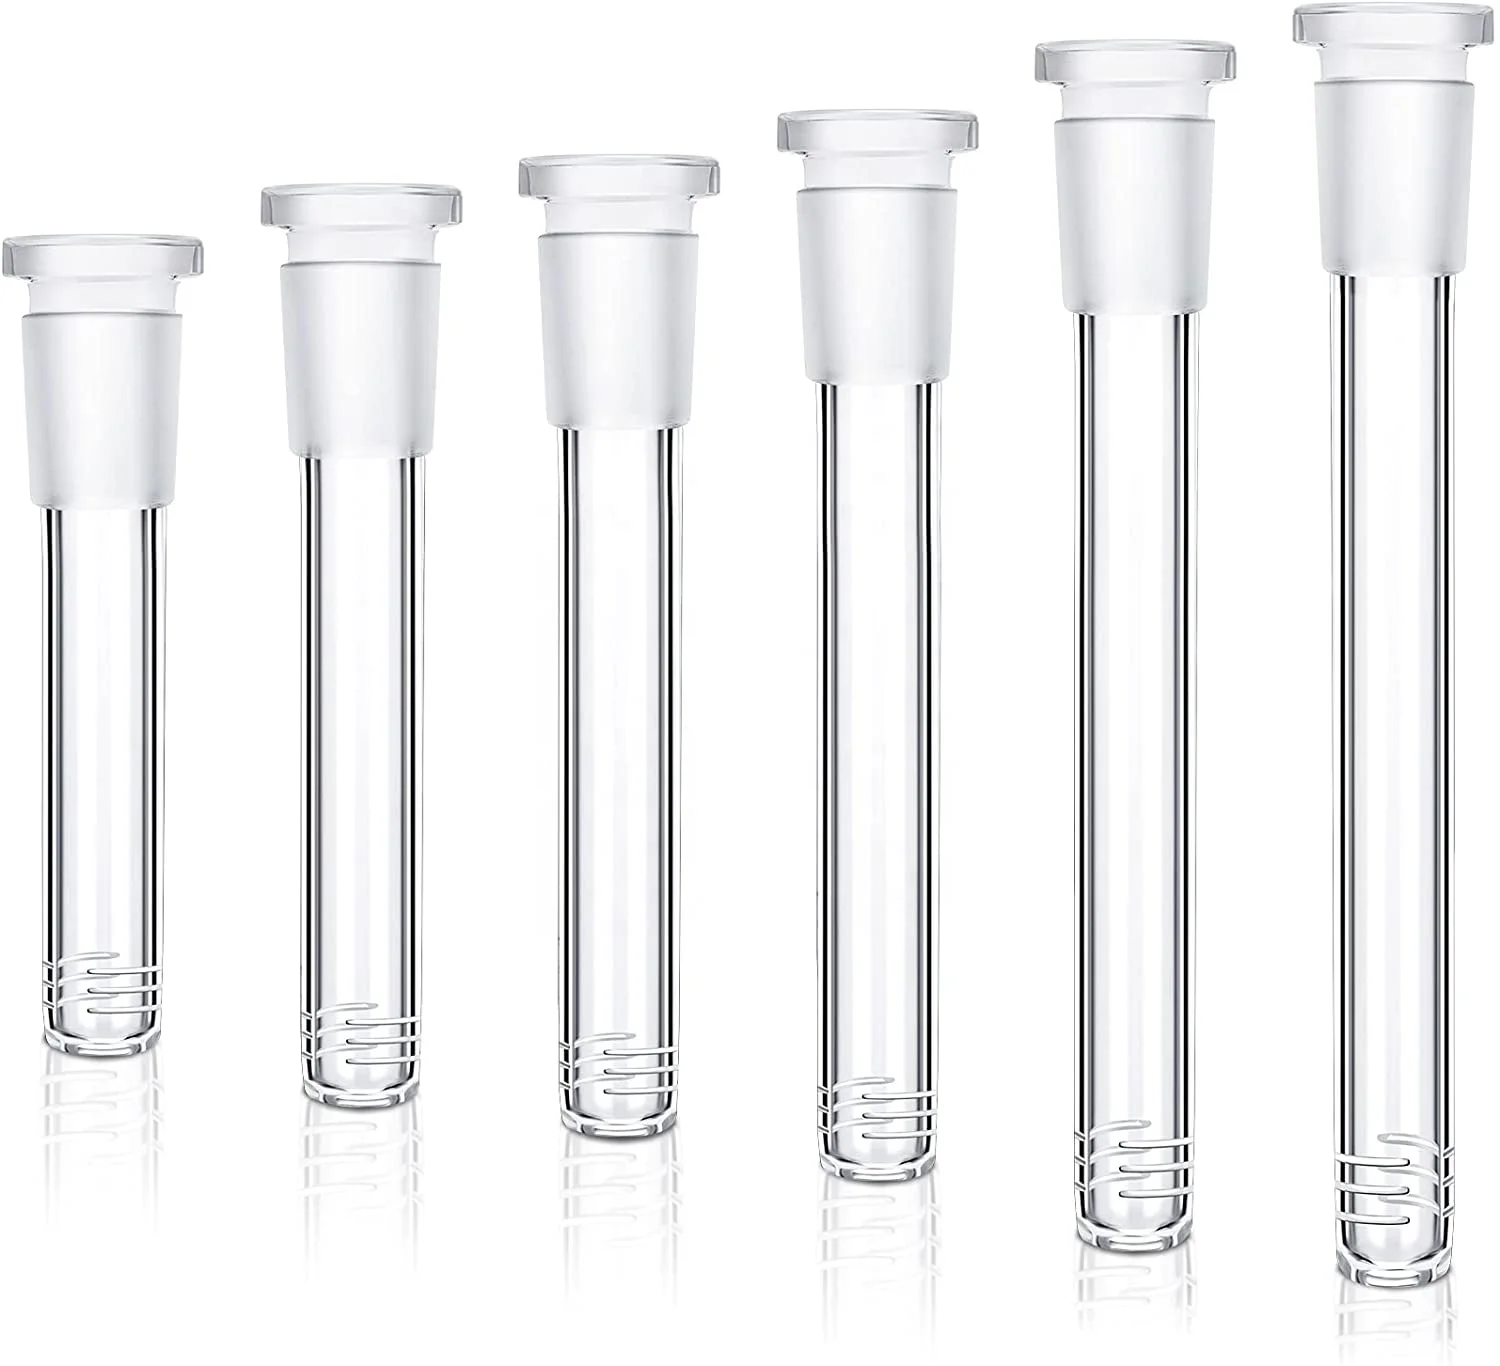 

High Quality 14mm 18mm Male Downstem 10cm 11cm 12cm 13cm 14cm Glass Tube Joint Adapter Diffuser